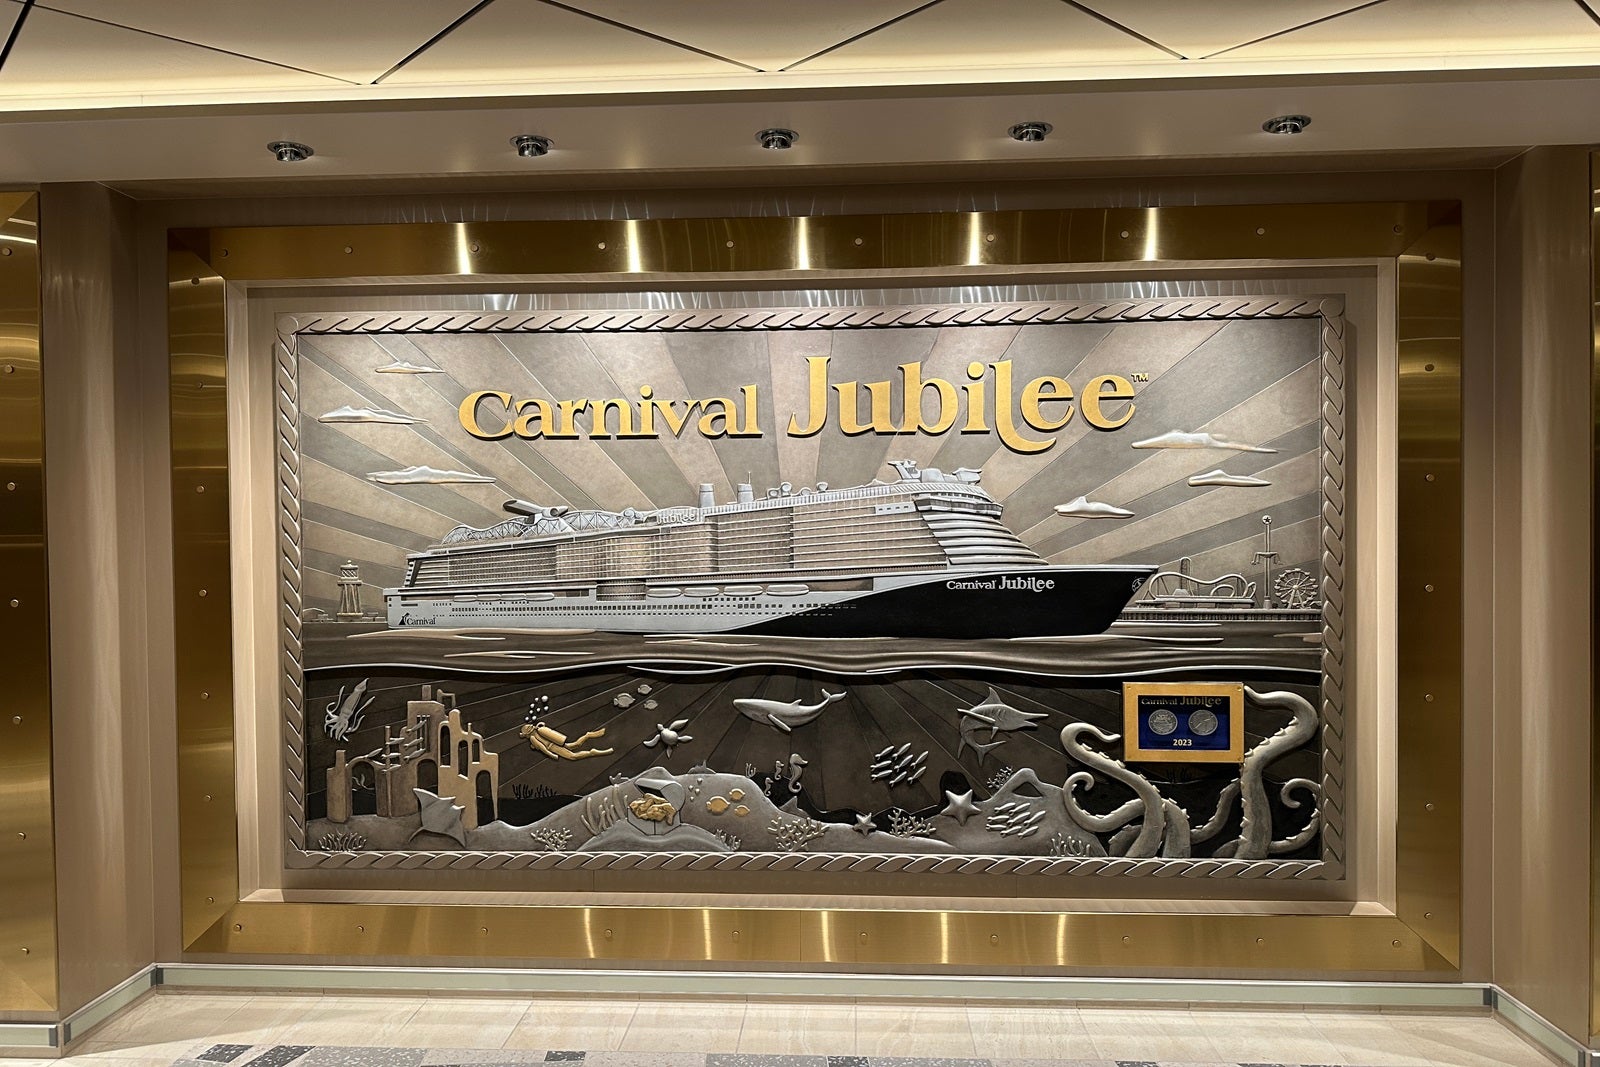 A metal wall sculpture depicts the Carnival Jubilee cruise ship